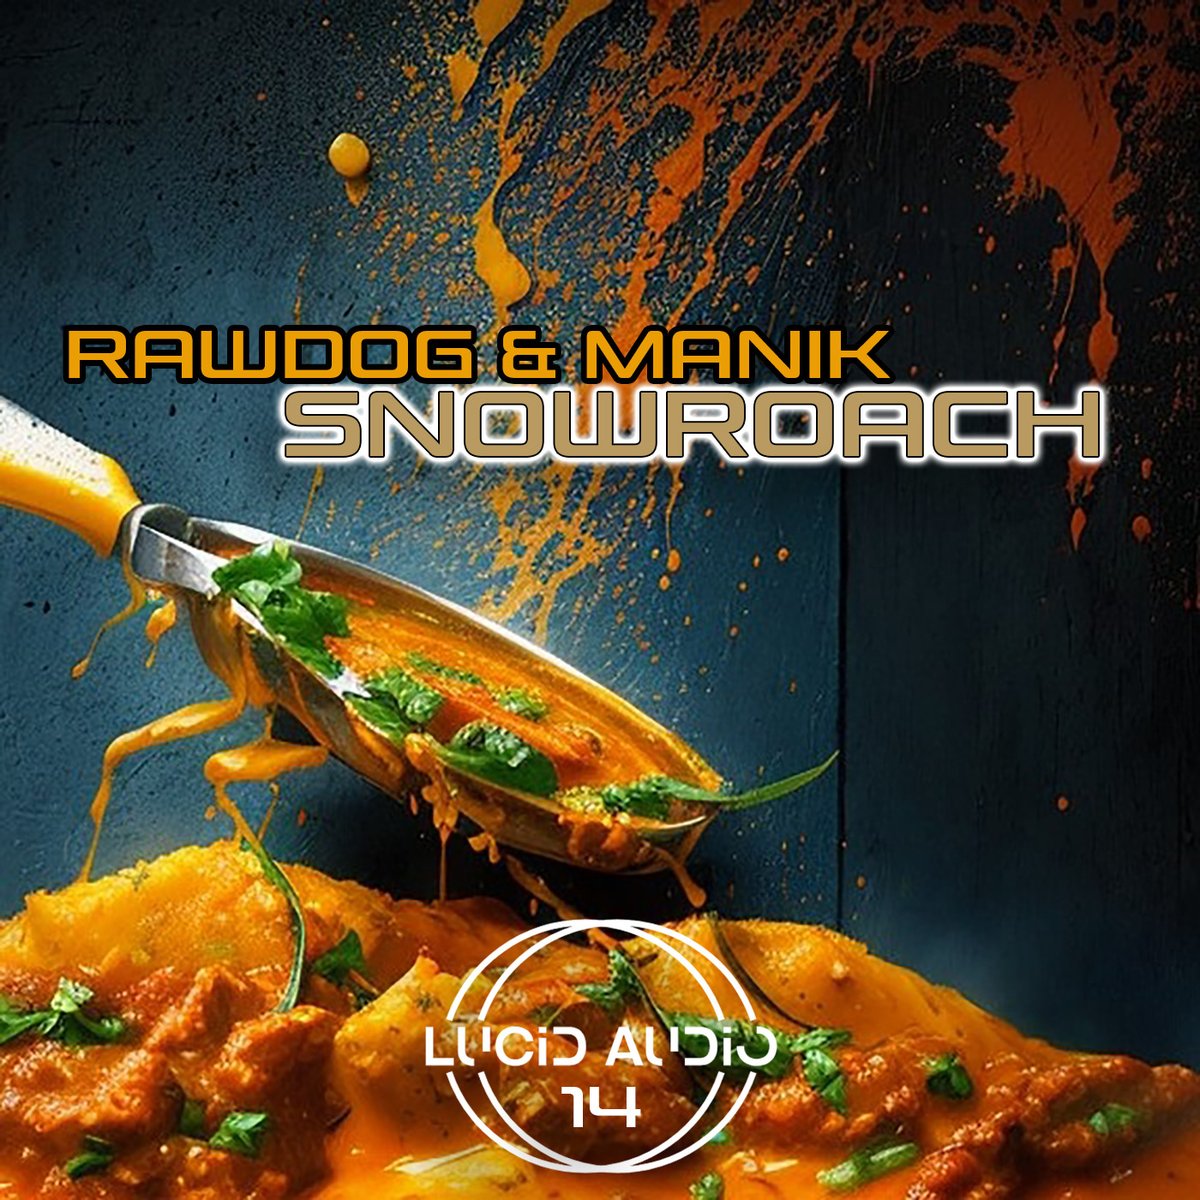 The latest Lucid Audio release 'Snowroach' from Rawdog and Manik (NZ) is available now exclusively at Toolbox Digital!

Check it out here:
bit.ly/snowroach

#hardhouse #harddance #toolboxdigital #newrelease #newmusic #lucidaudio